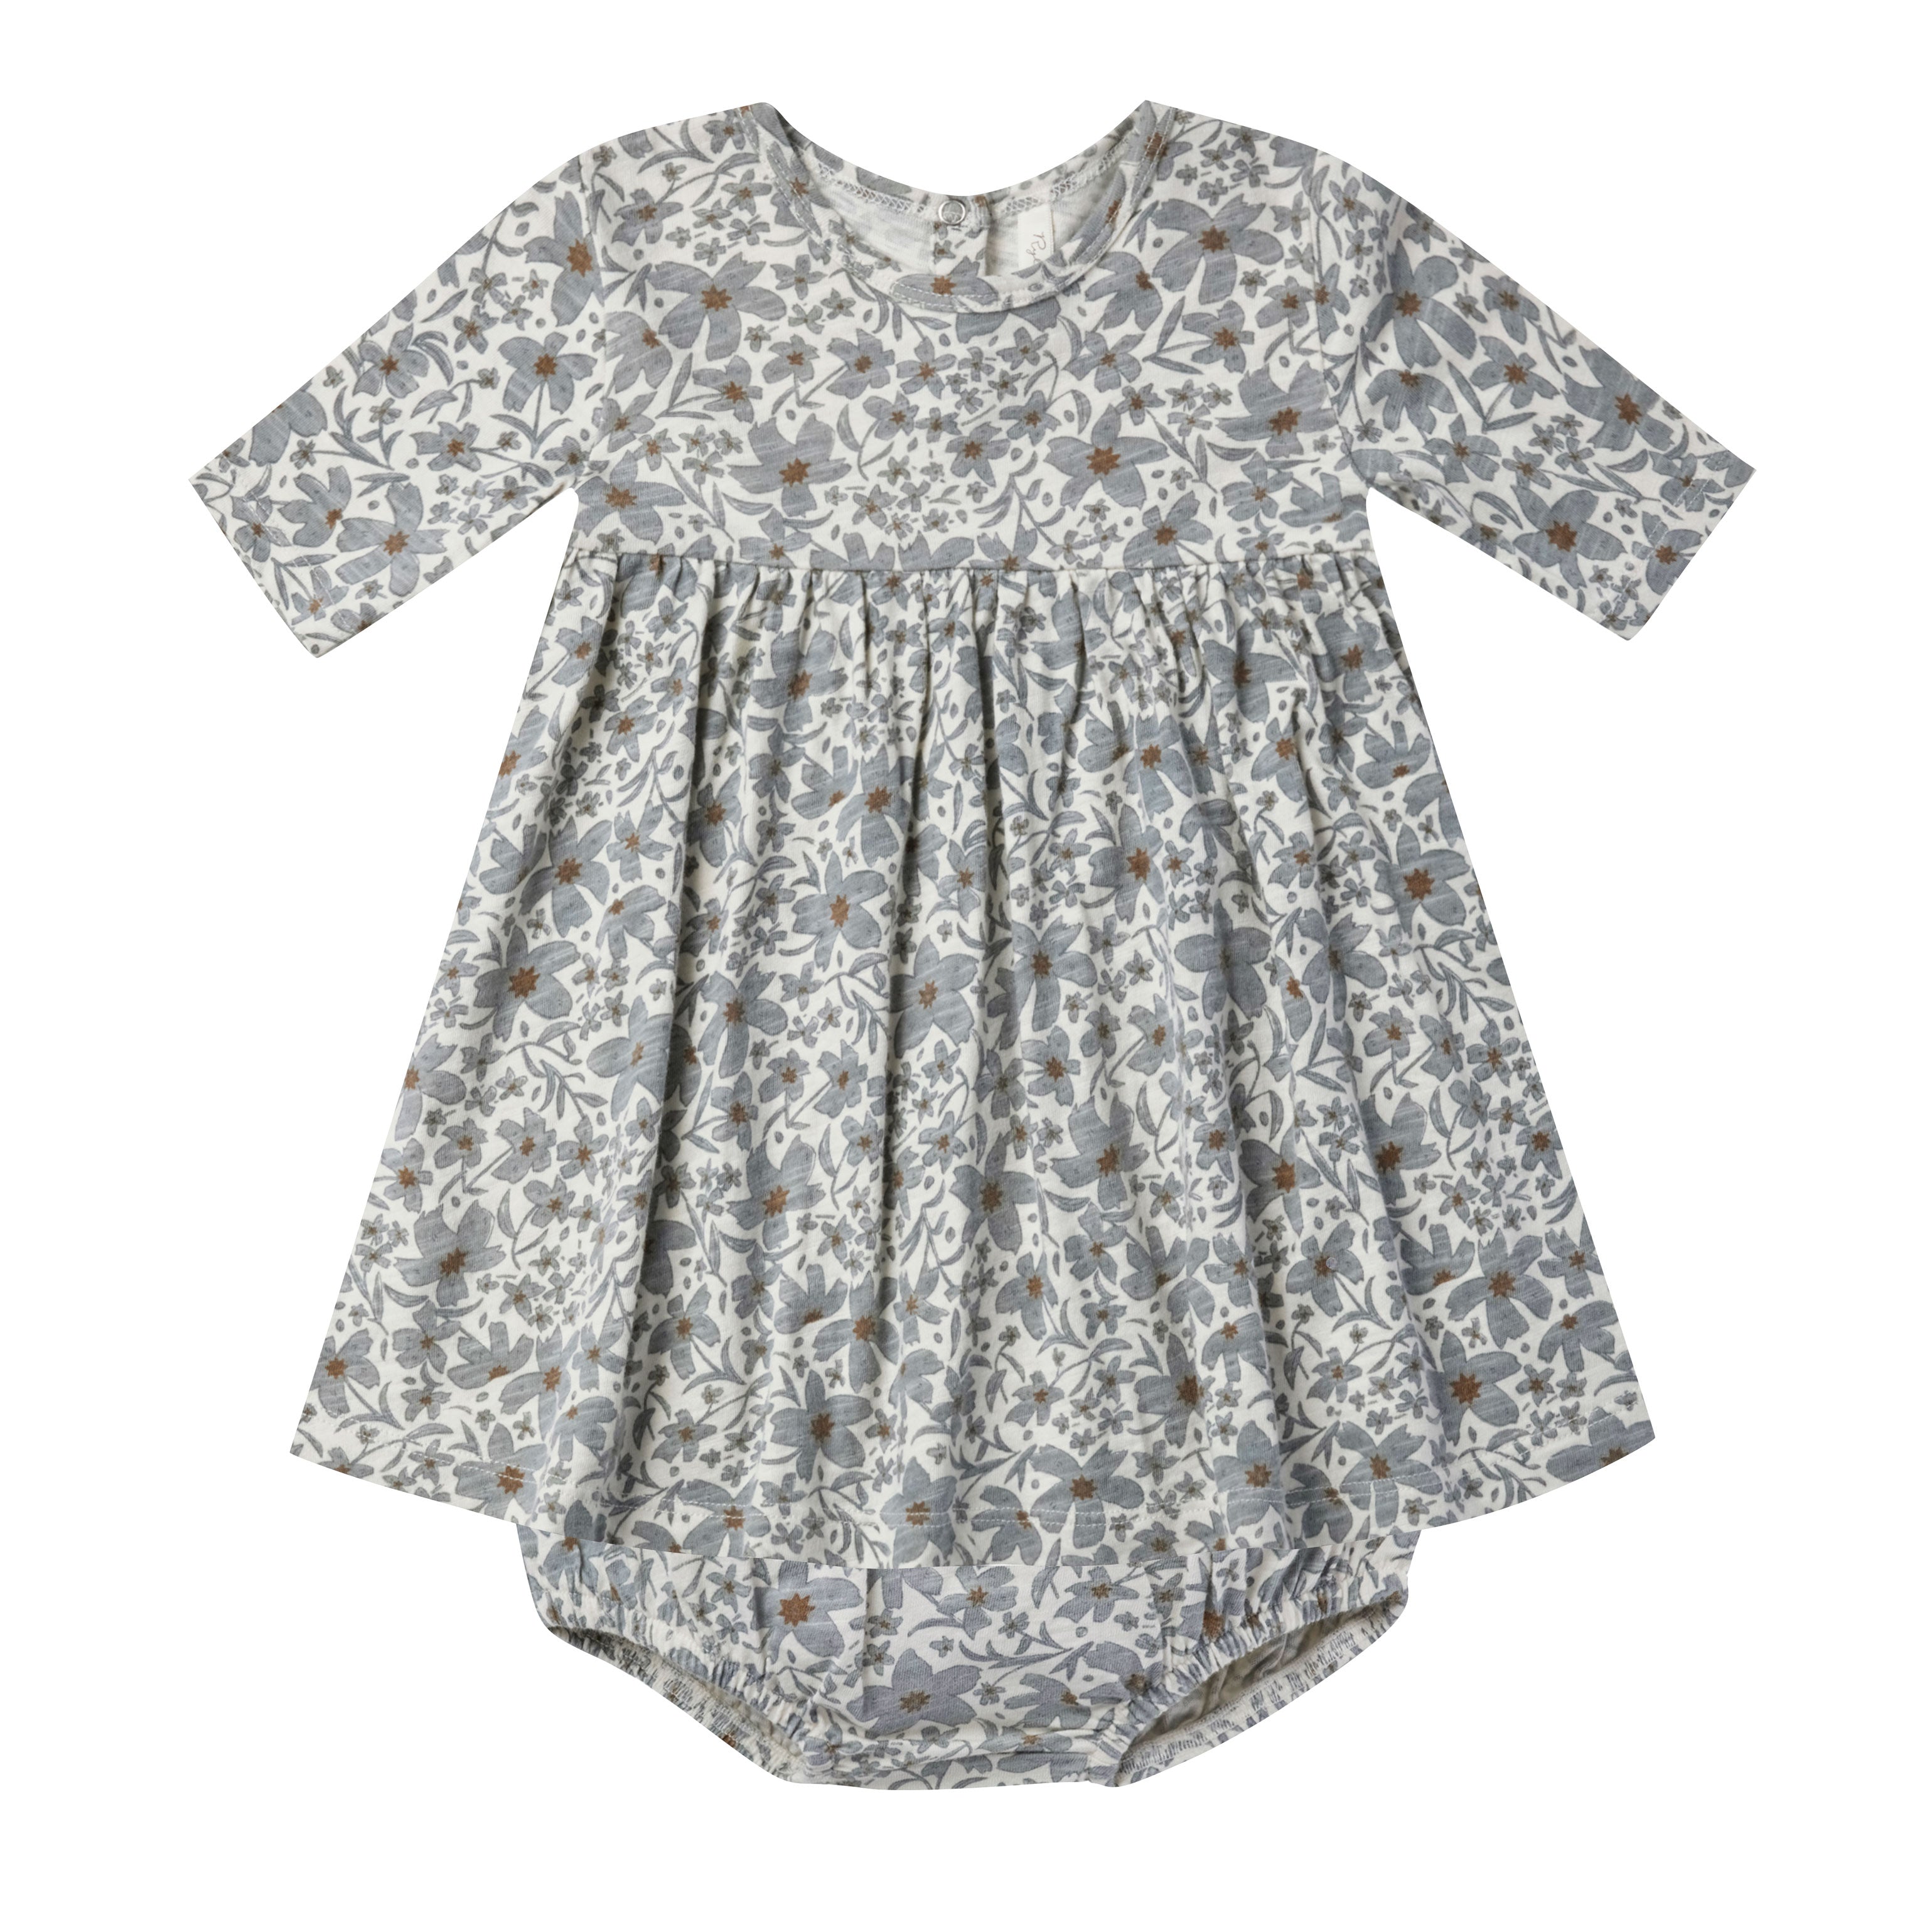 Adorable blue floral baby dress and bloomer set by Rylee and Cru at Bonjour Baby Baskets